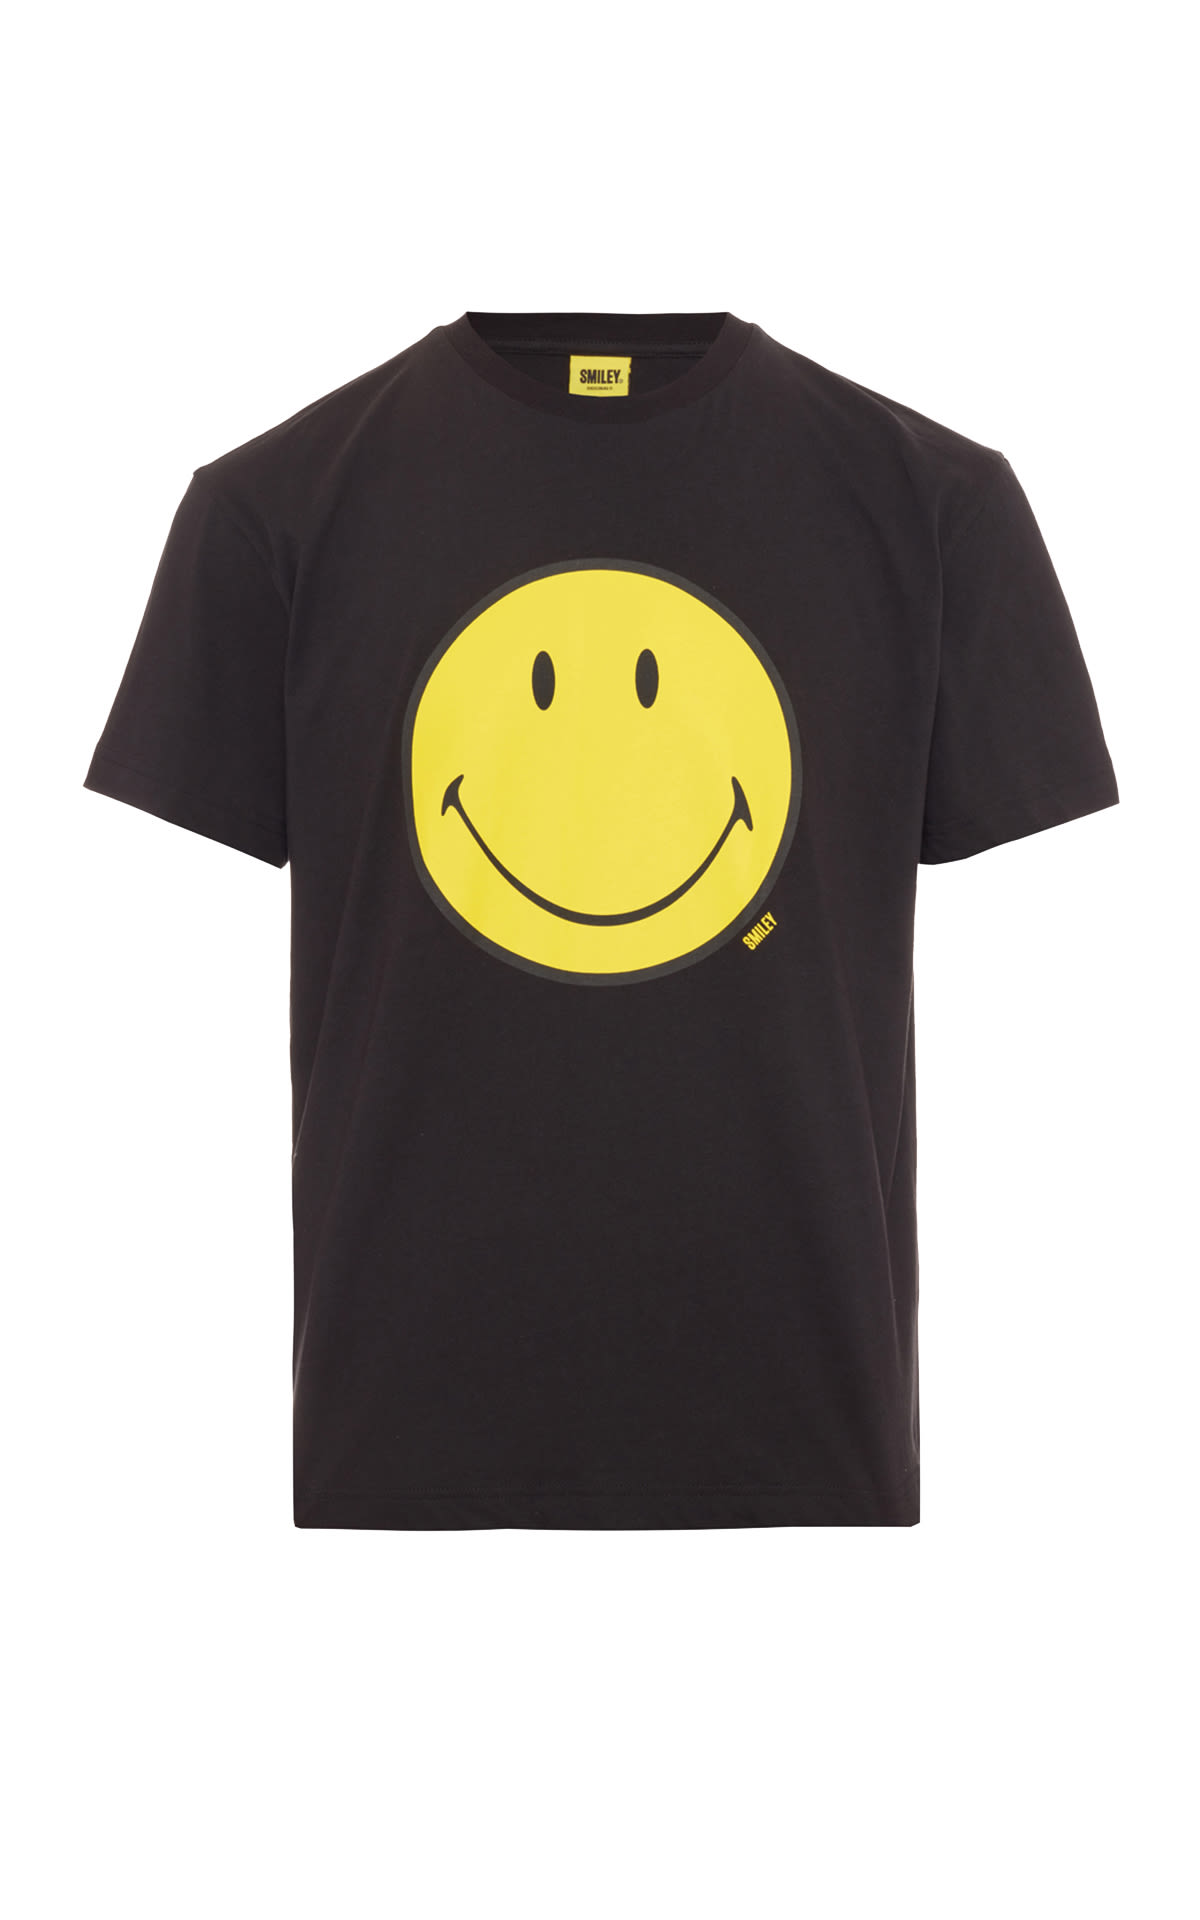 Smiley x Do Good Black t-shirt from Bicester Village